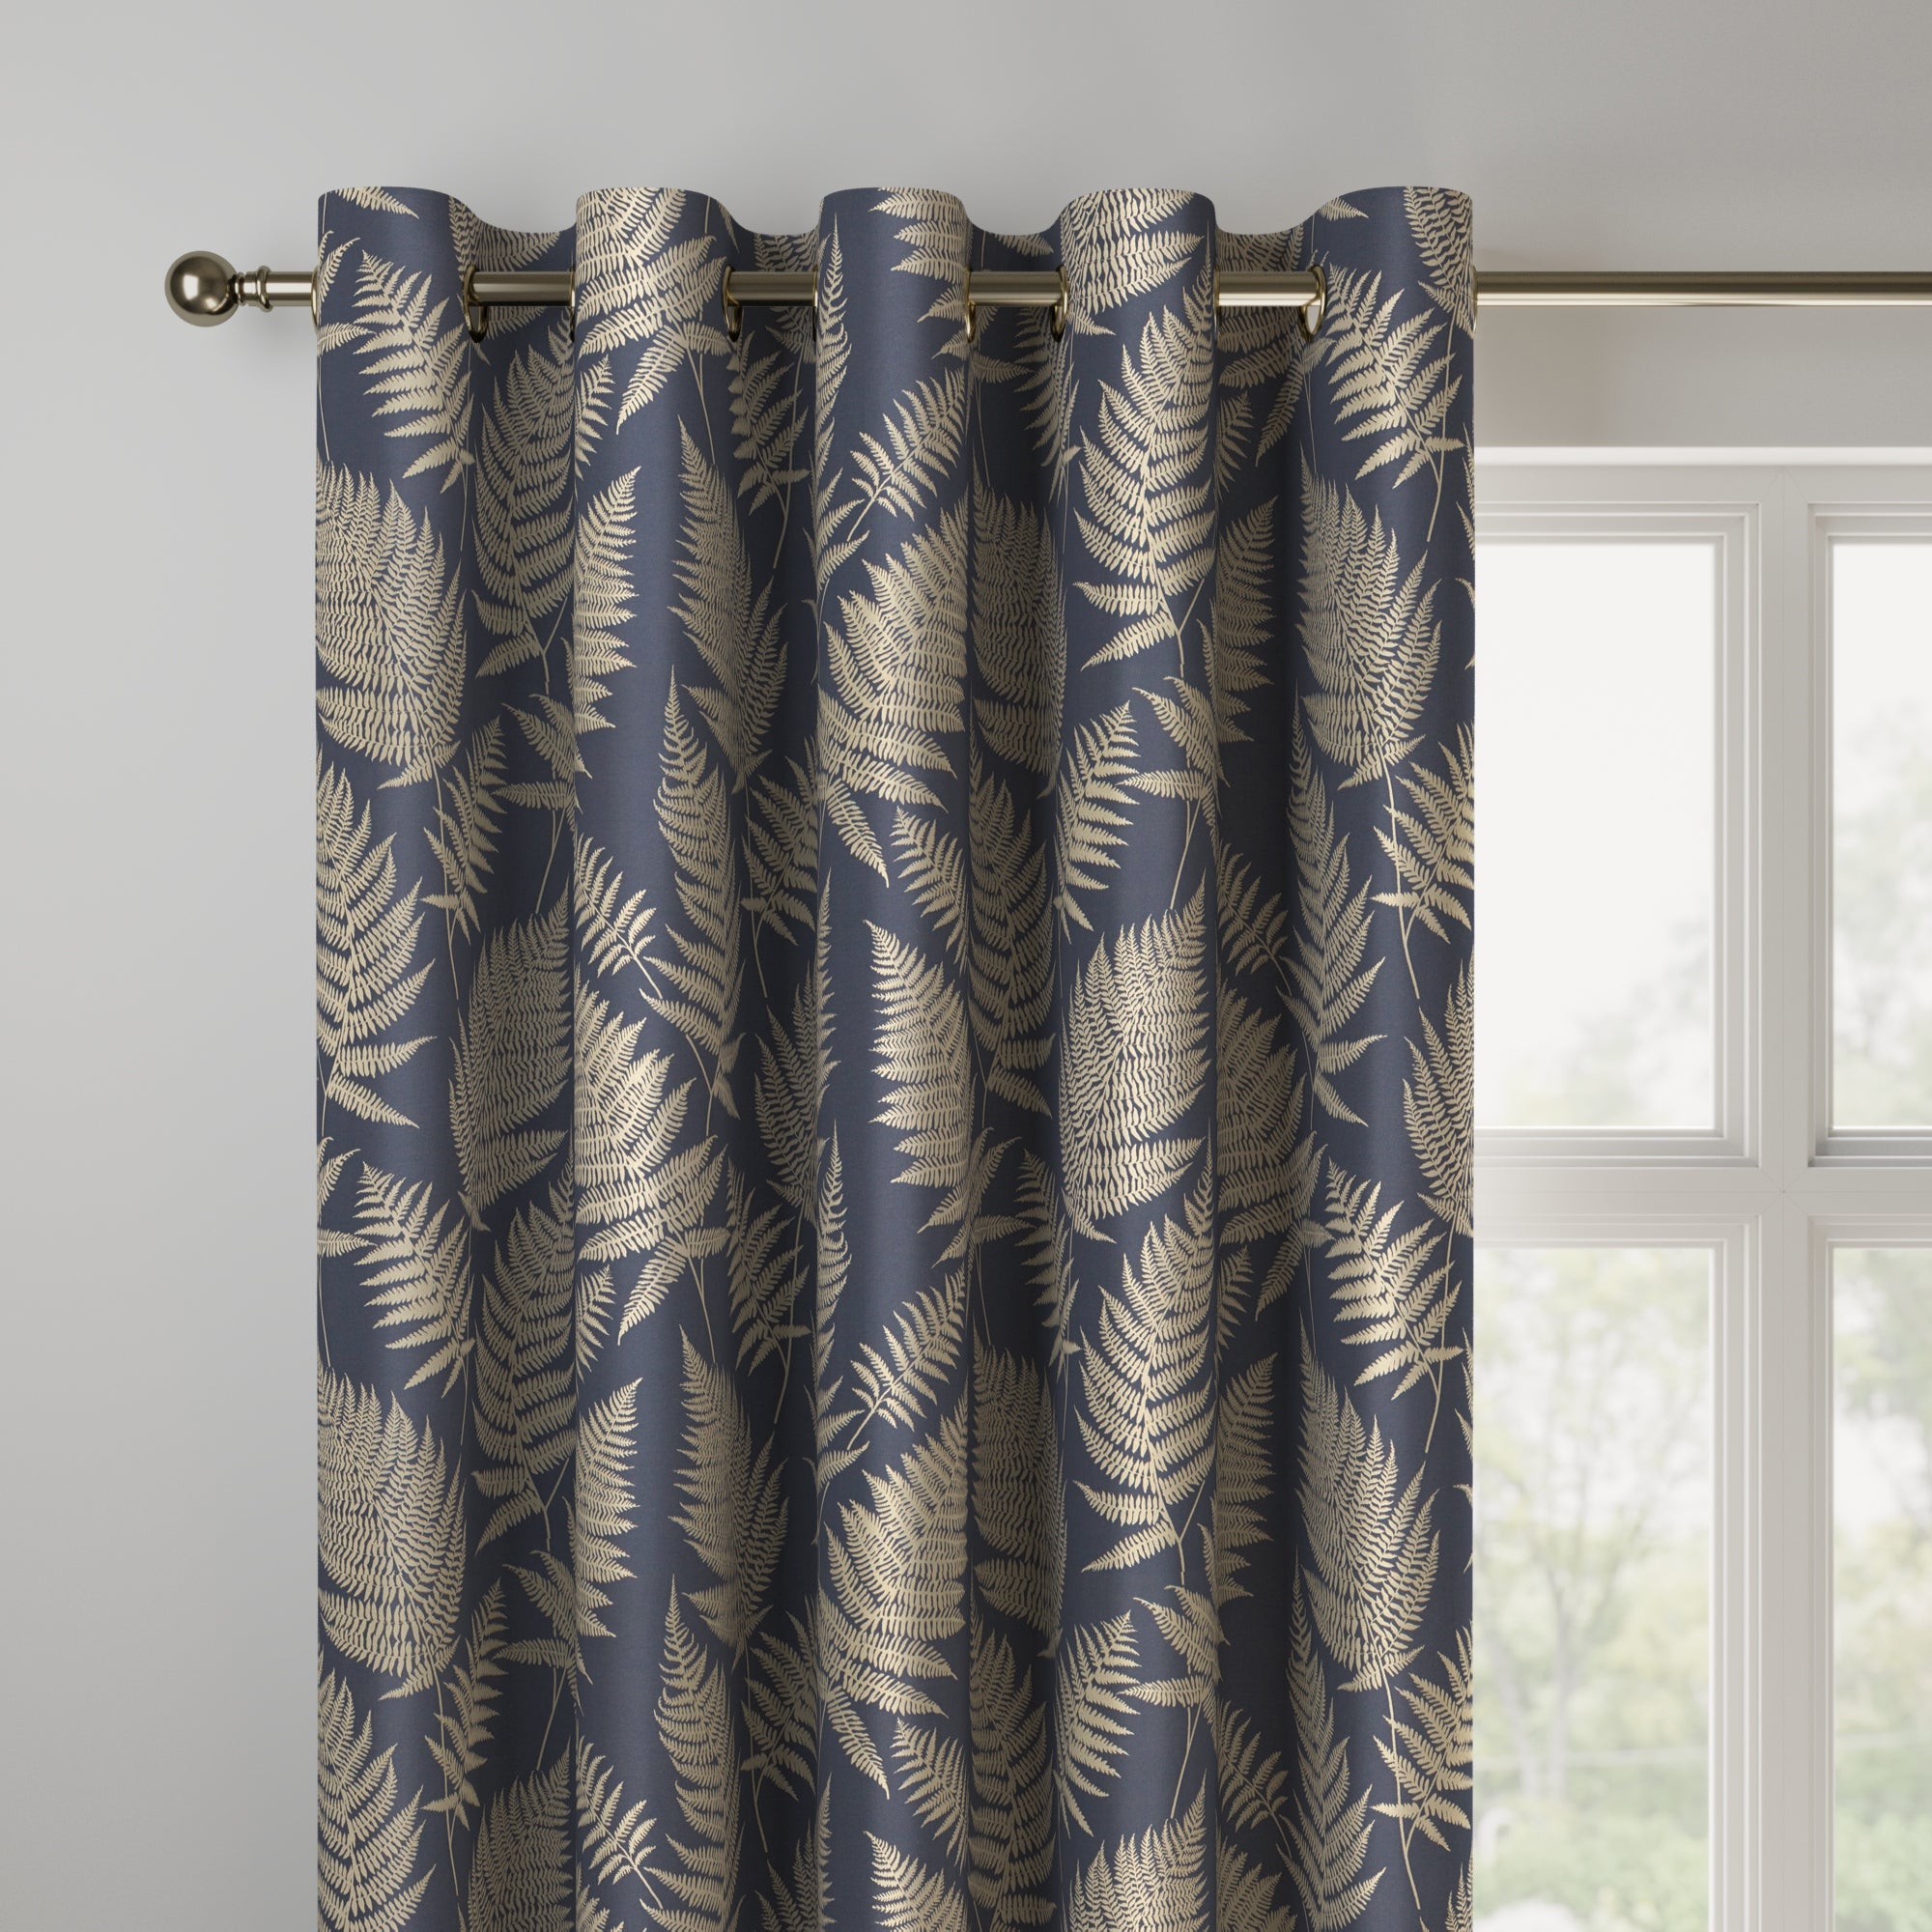 Affinis Made to Measure Curtains Affinis Danube